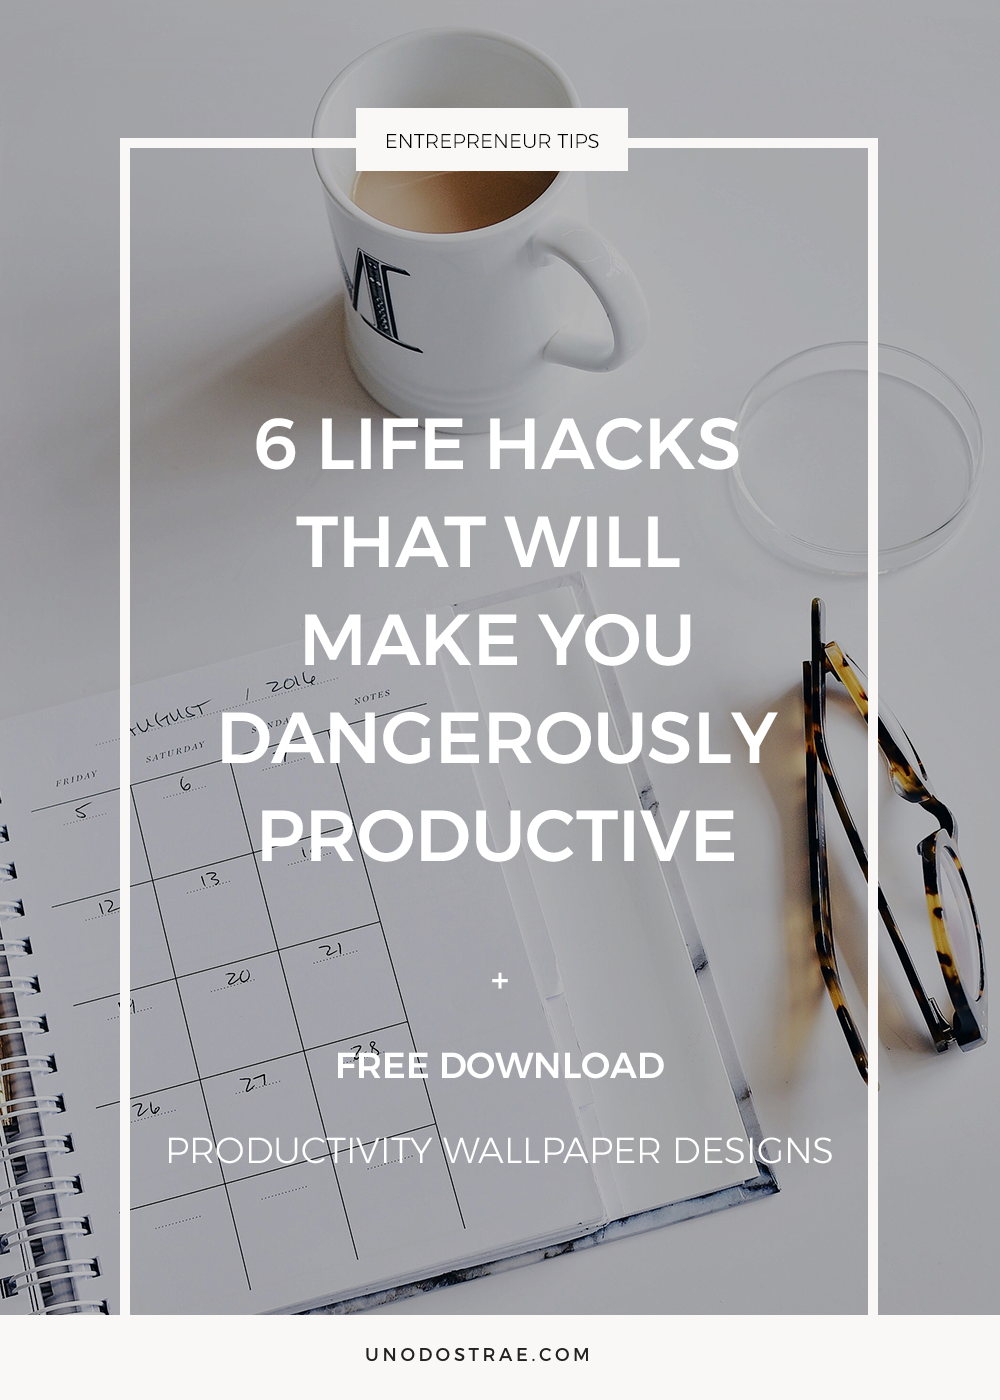 Feeling seriously unproductive? Try these 6 life hacks and see a boost of productivity!